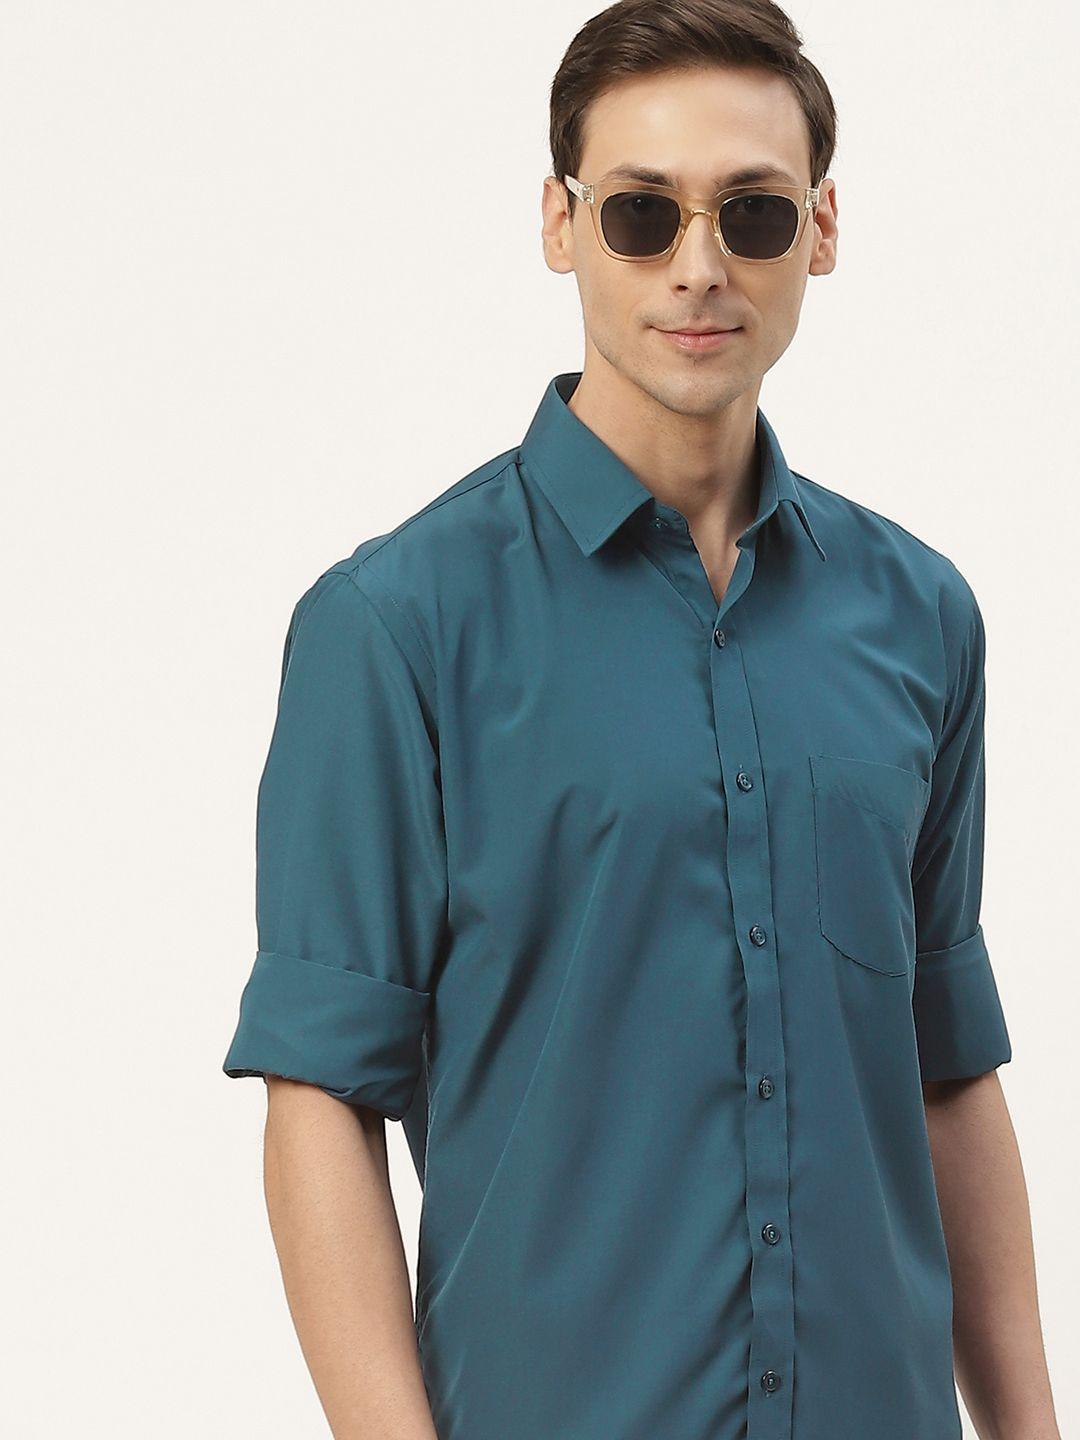 english navy men turquoise blue classic slim fit casual shirt